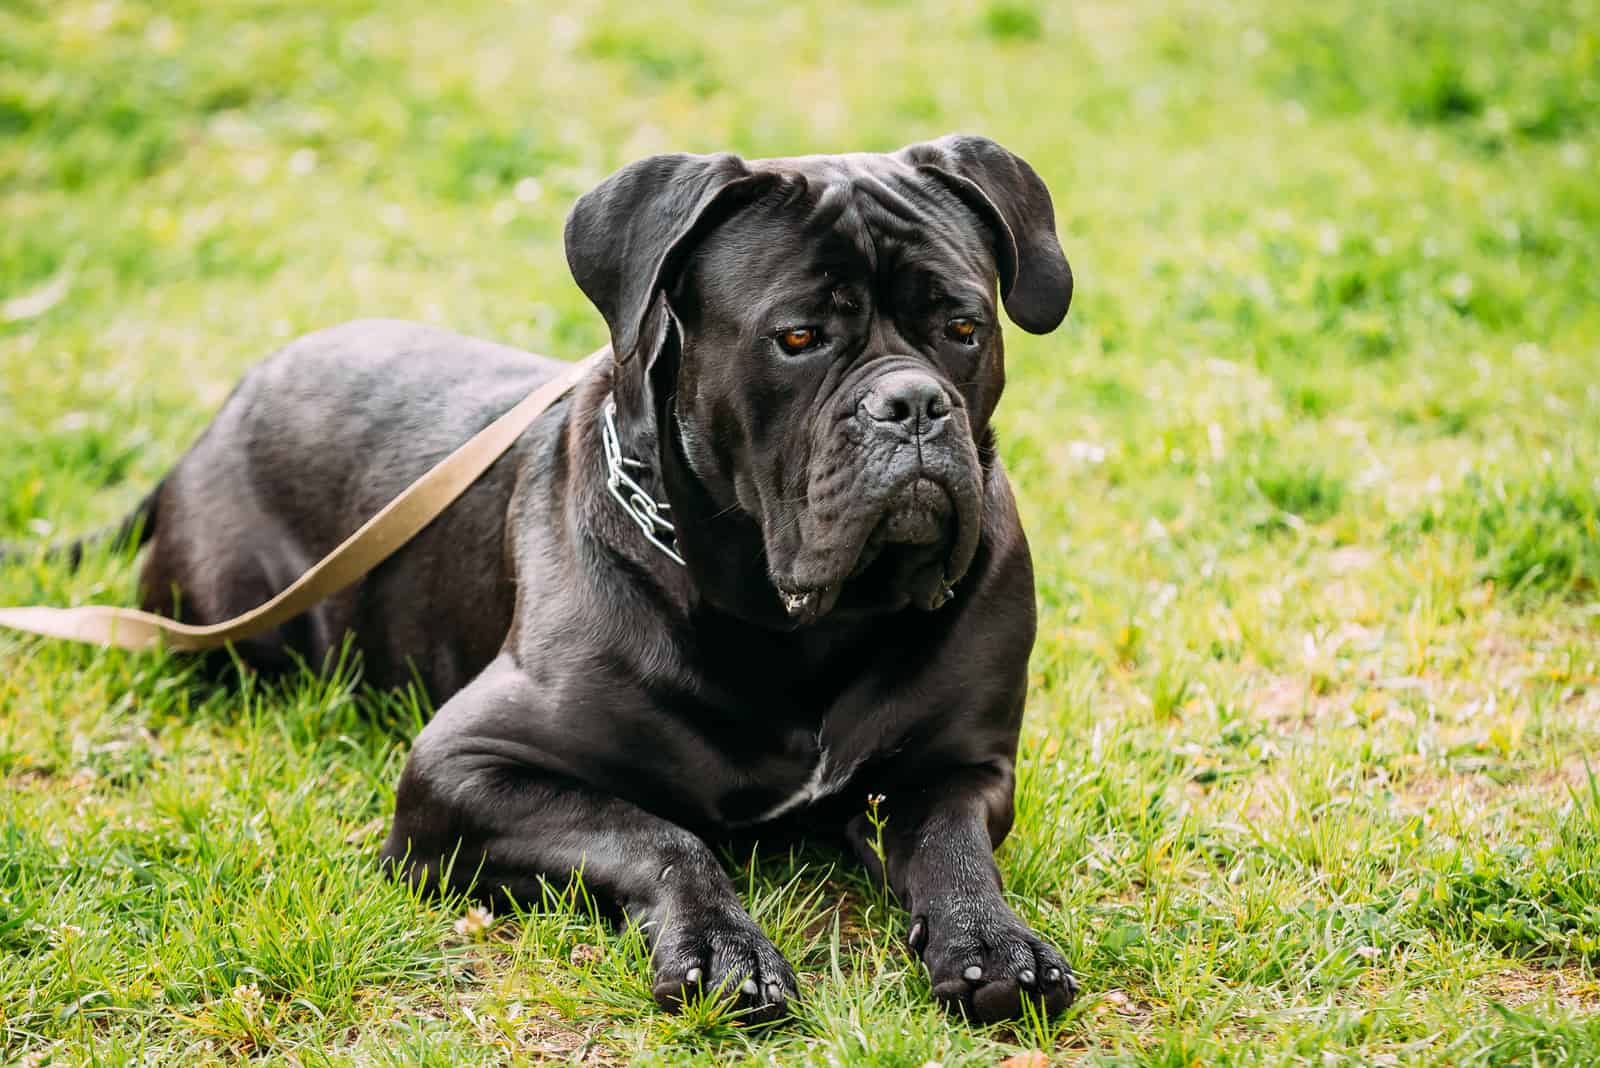 Black Young Cane Corso Dog Sit On Green Grass Outdoors